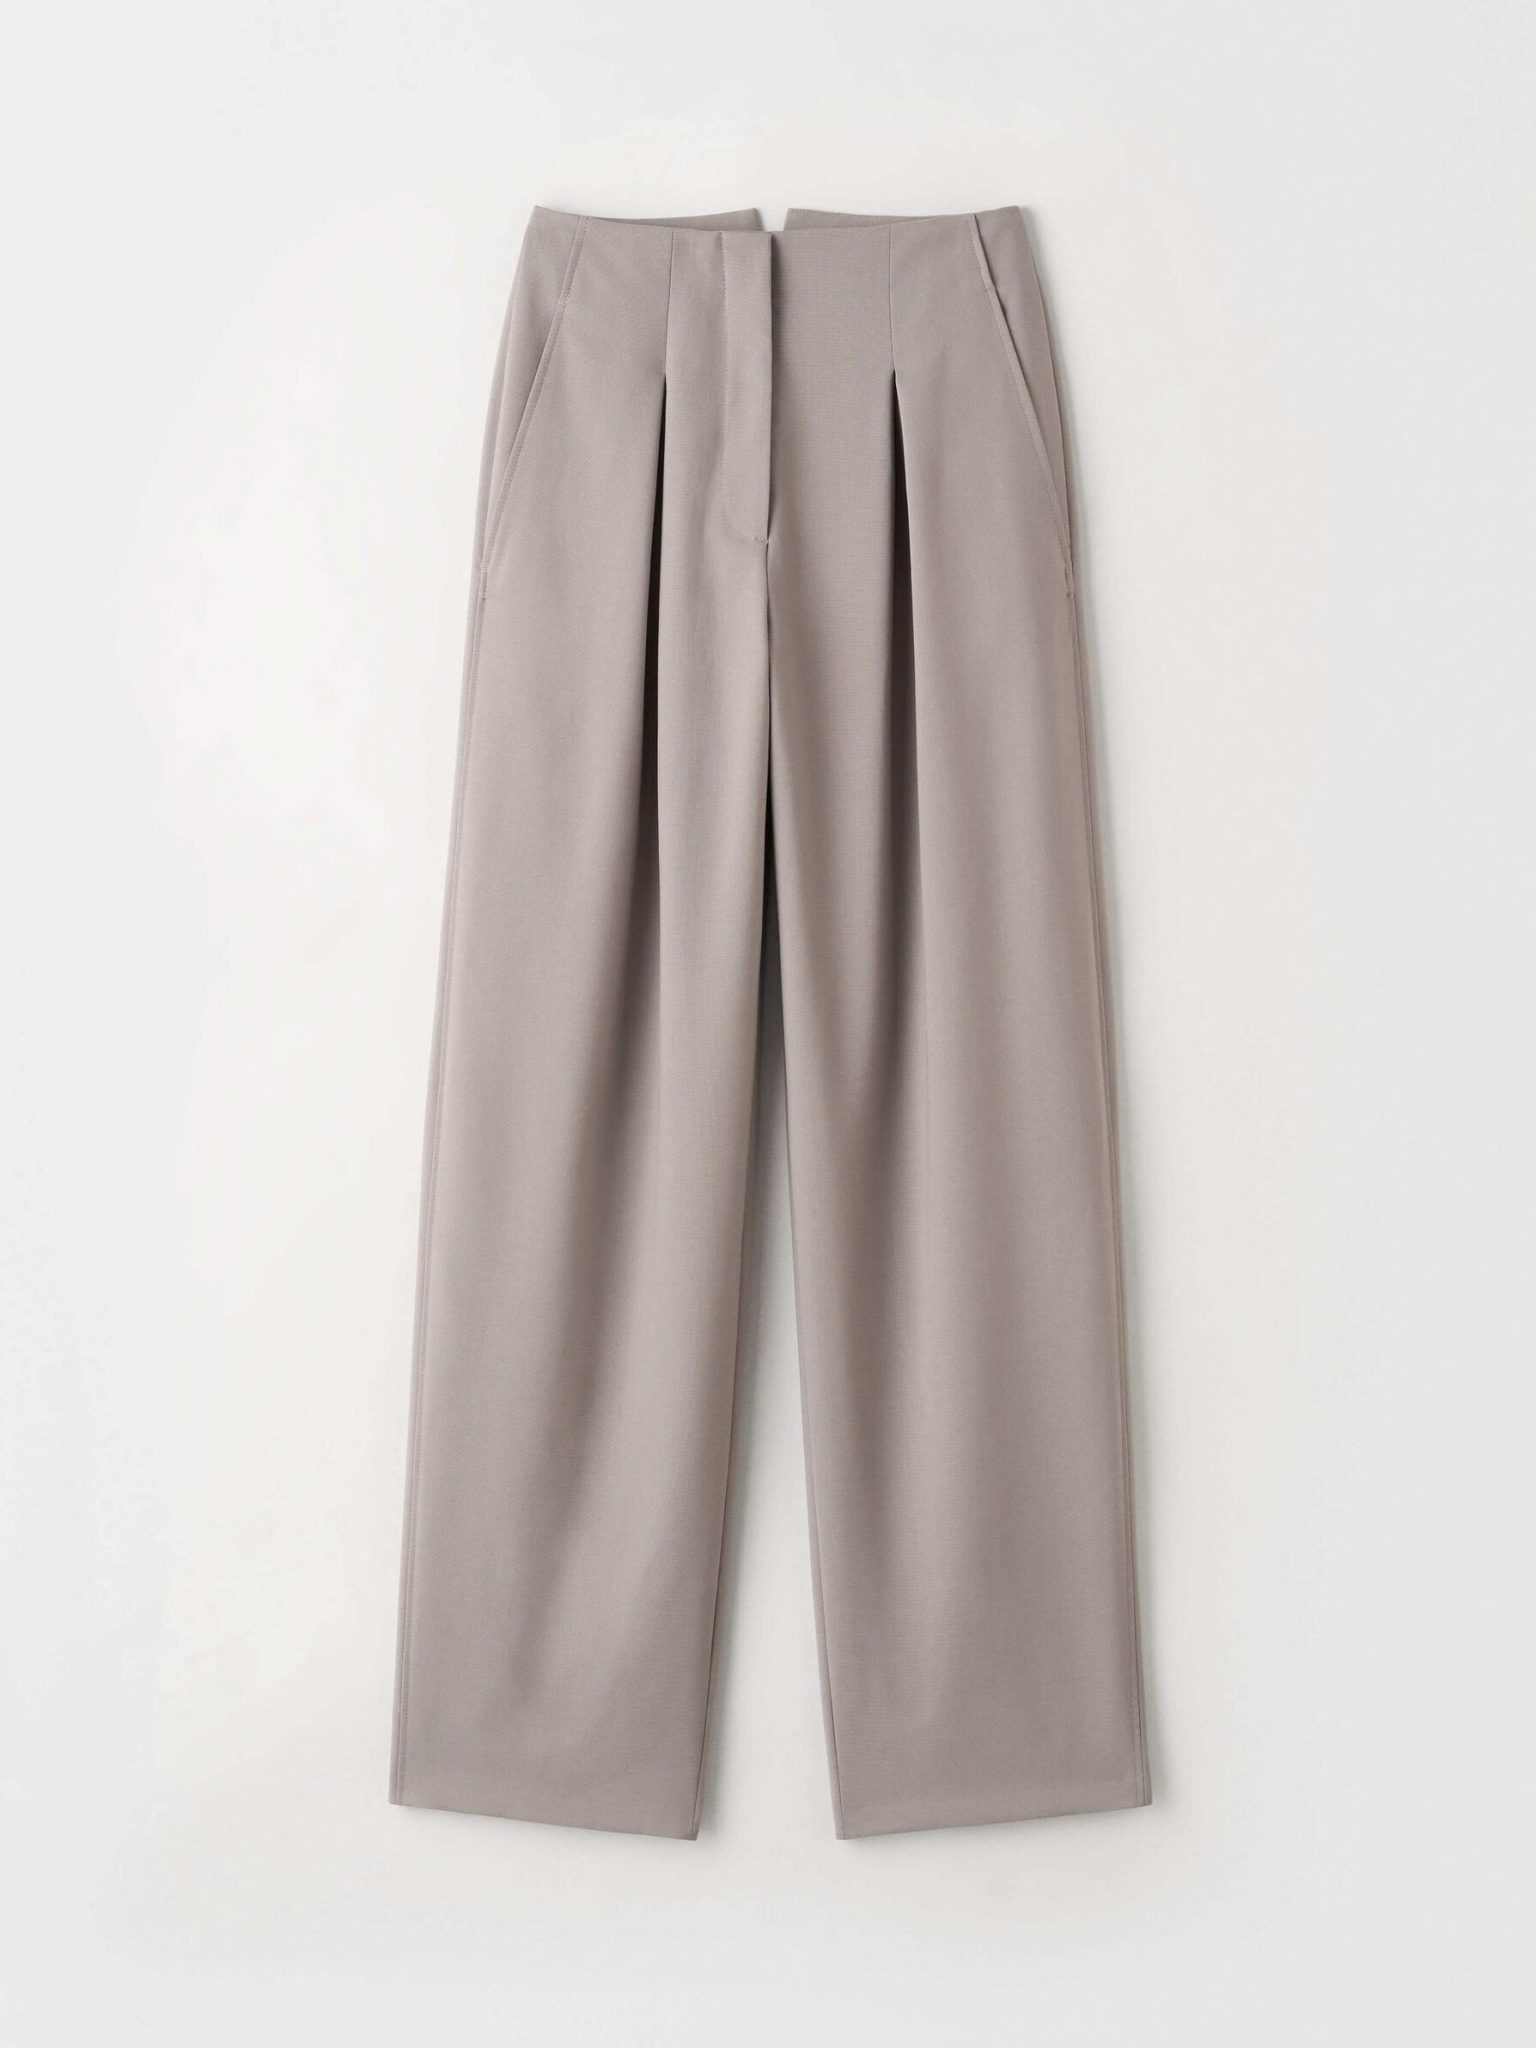 Crio stretch tapered pant, Tiger of Sweden